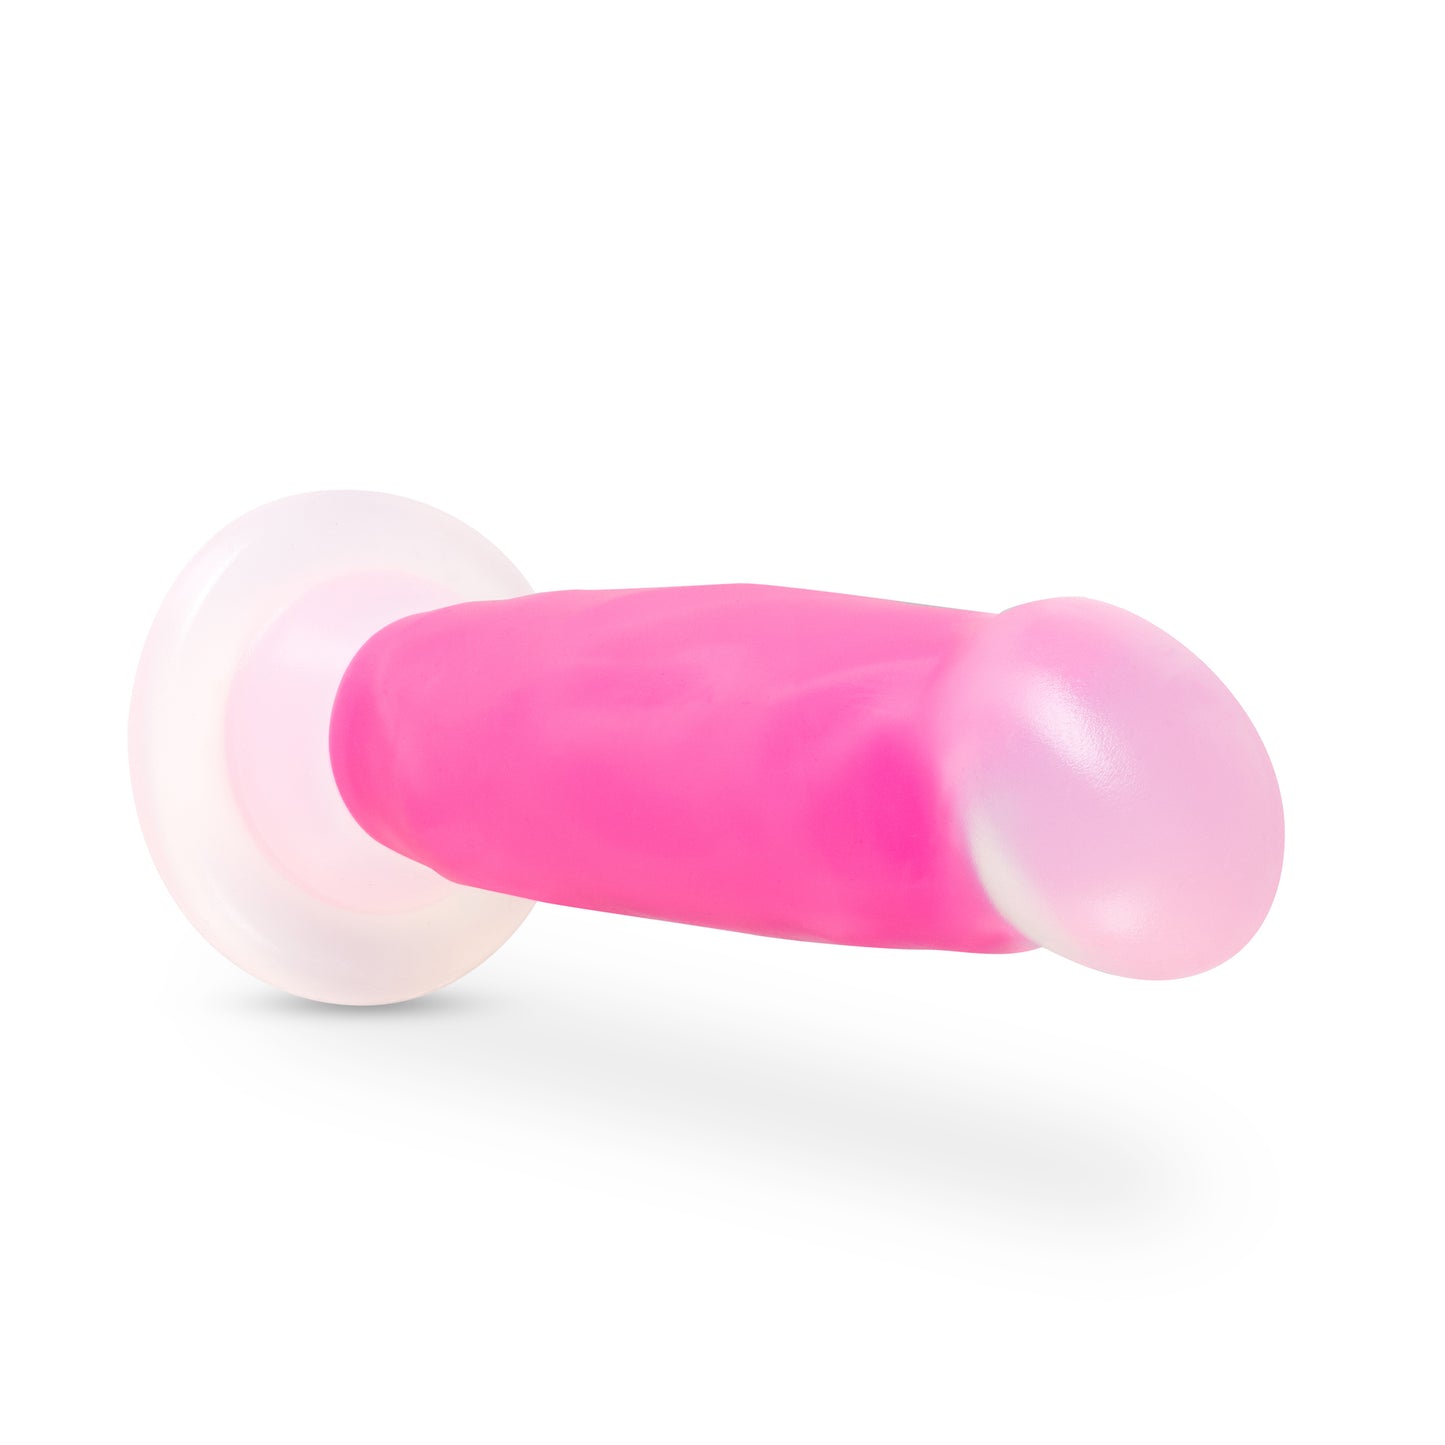 Neo Elite Glow in the Dark - Marquee - 8 Inch  Silicone Dual Density Dildo  - Neon Pink